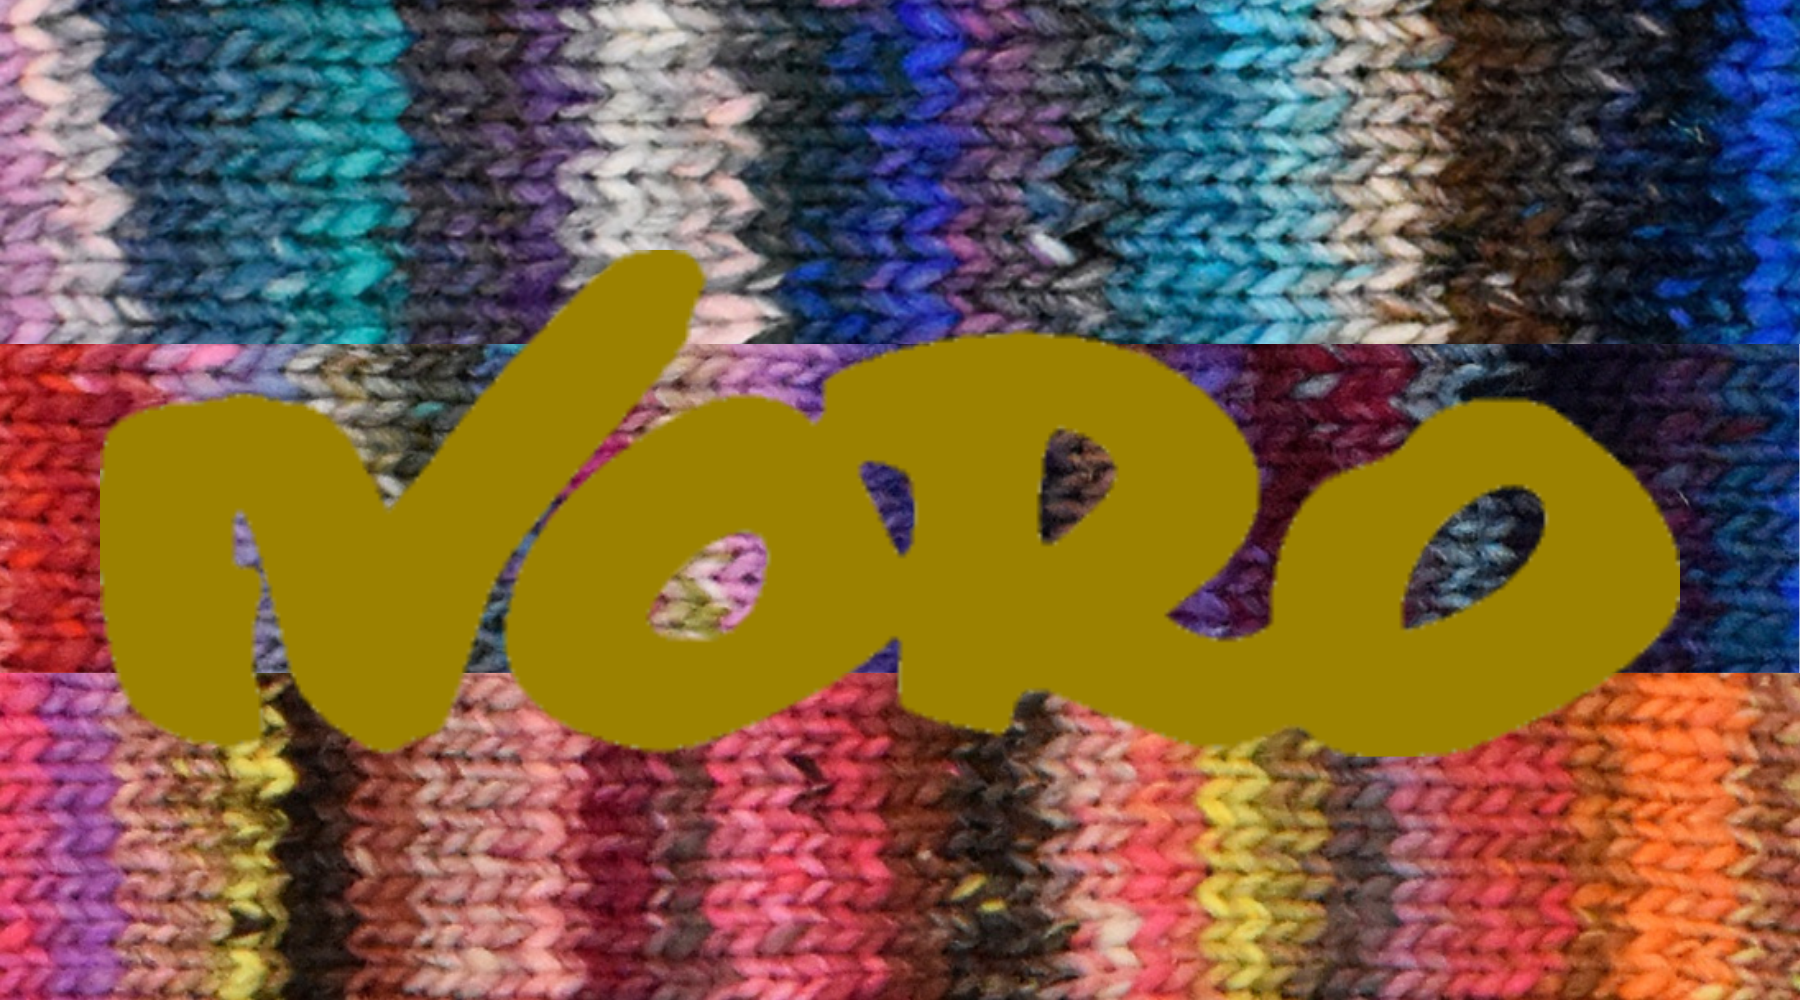 What is it about Noro?